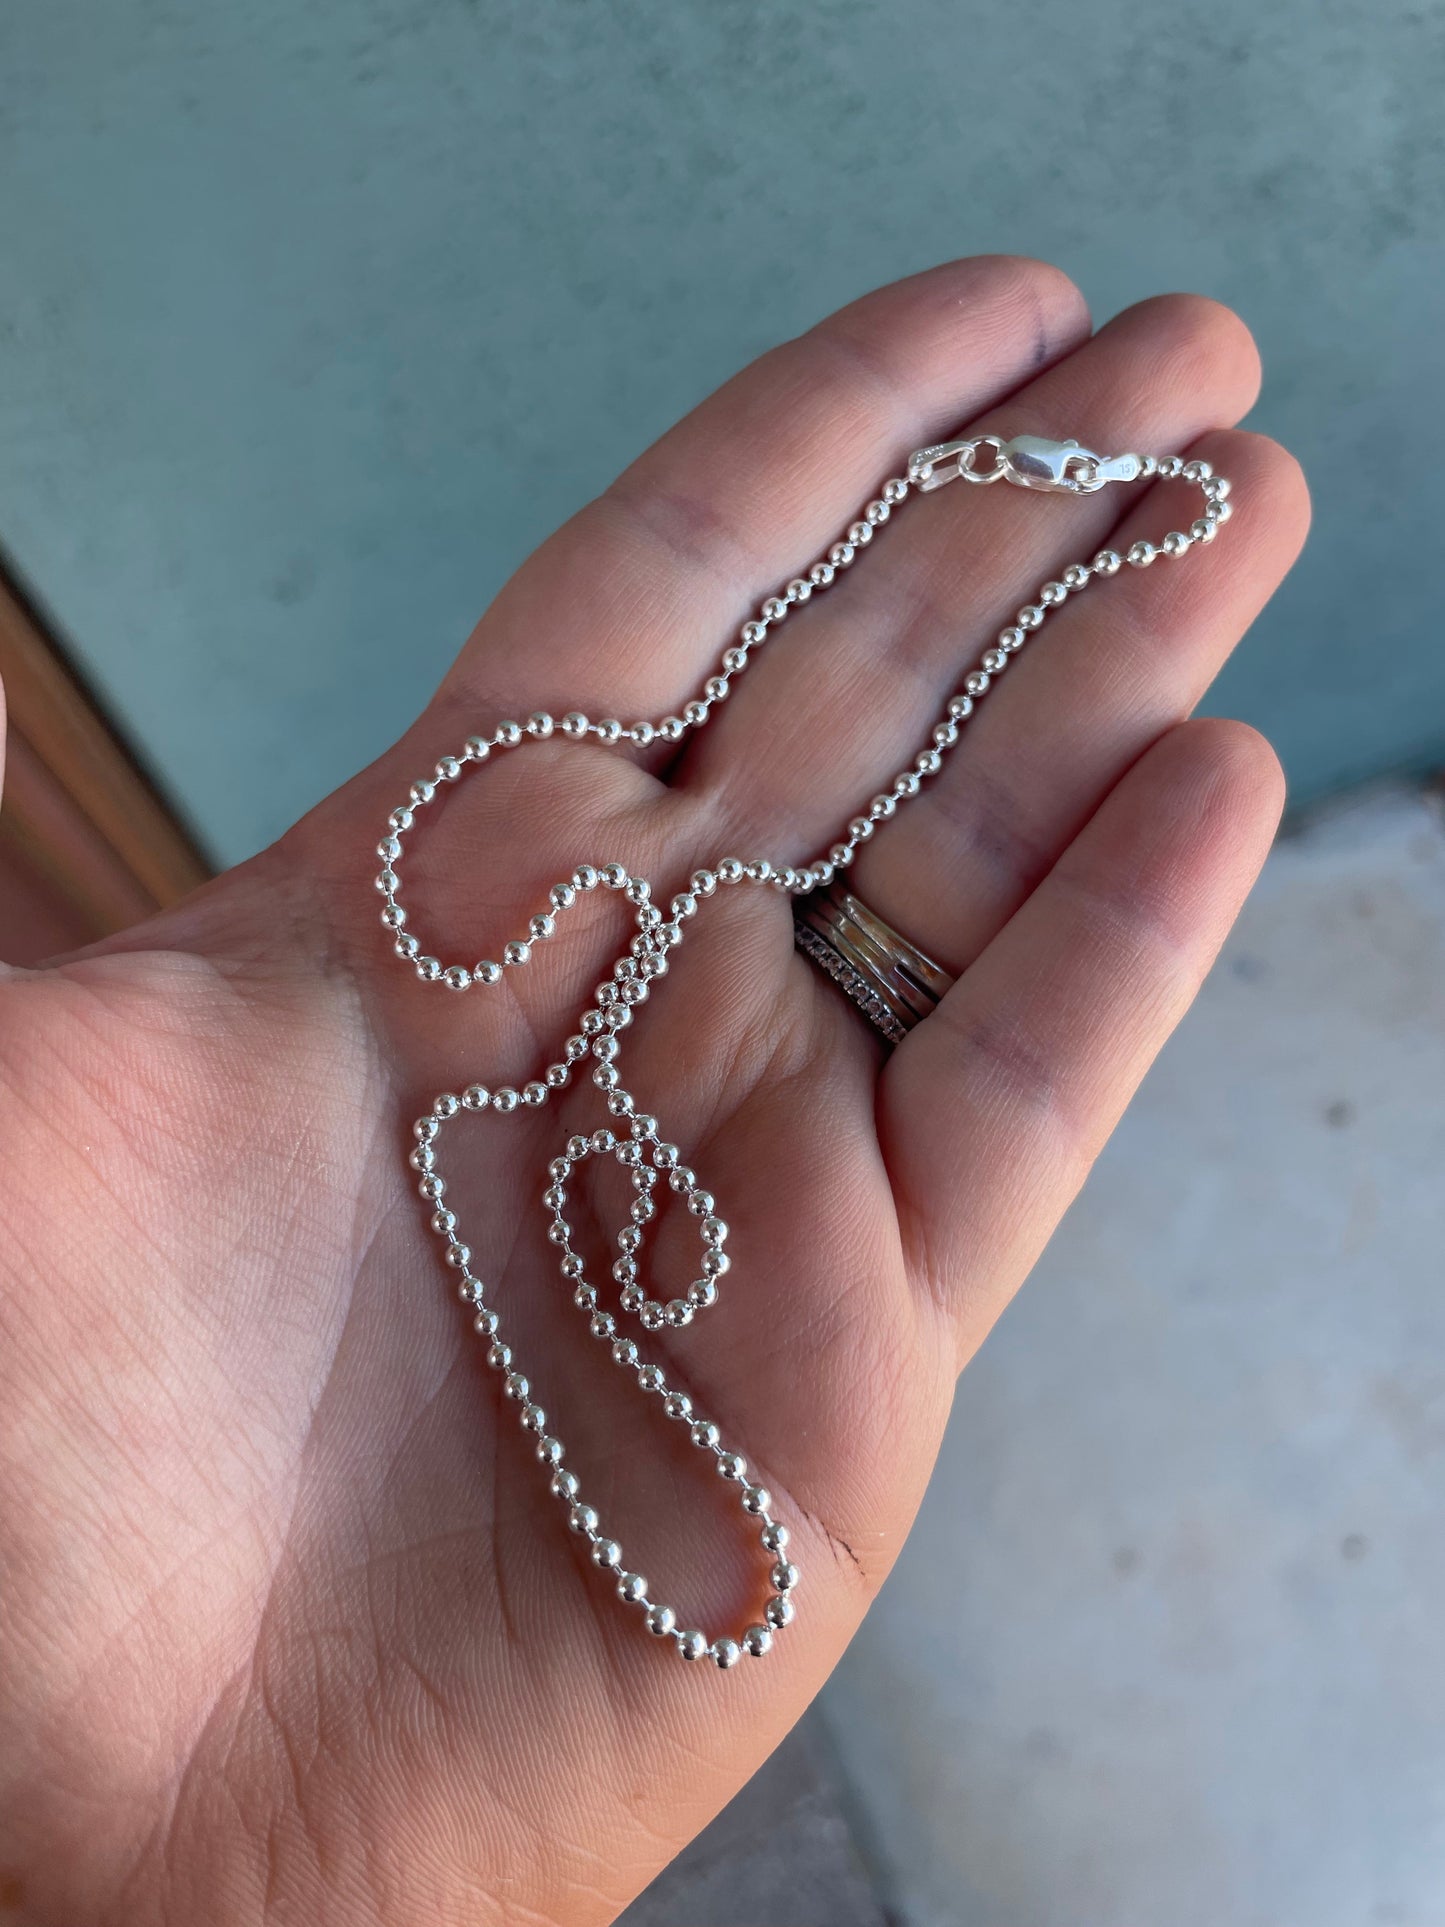 3mm Sterling Silver Pearl Beaded 18” Necklace